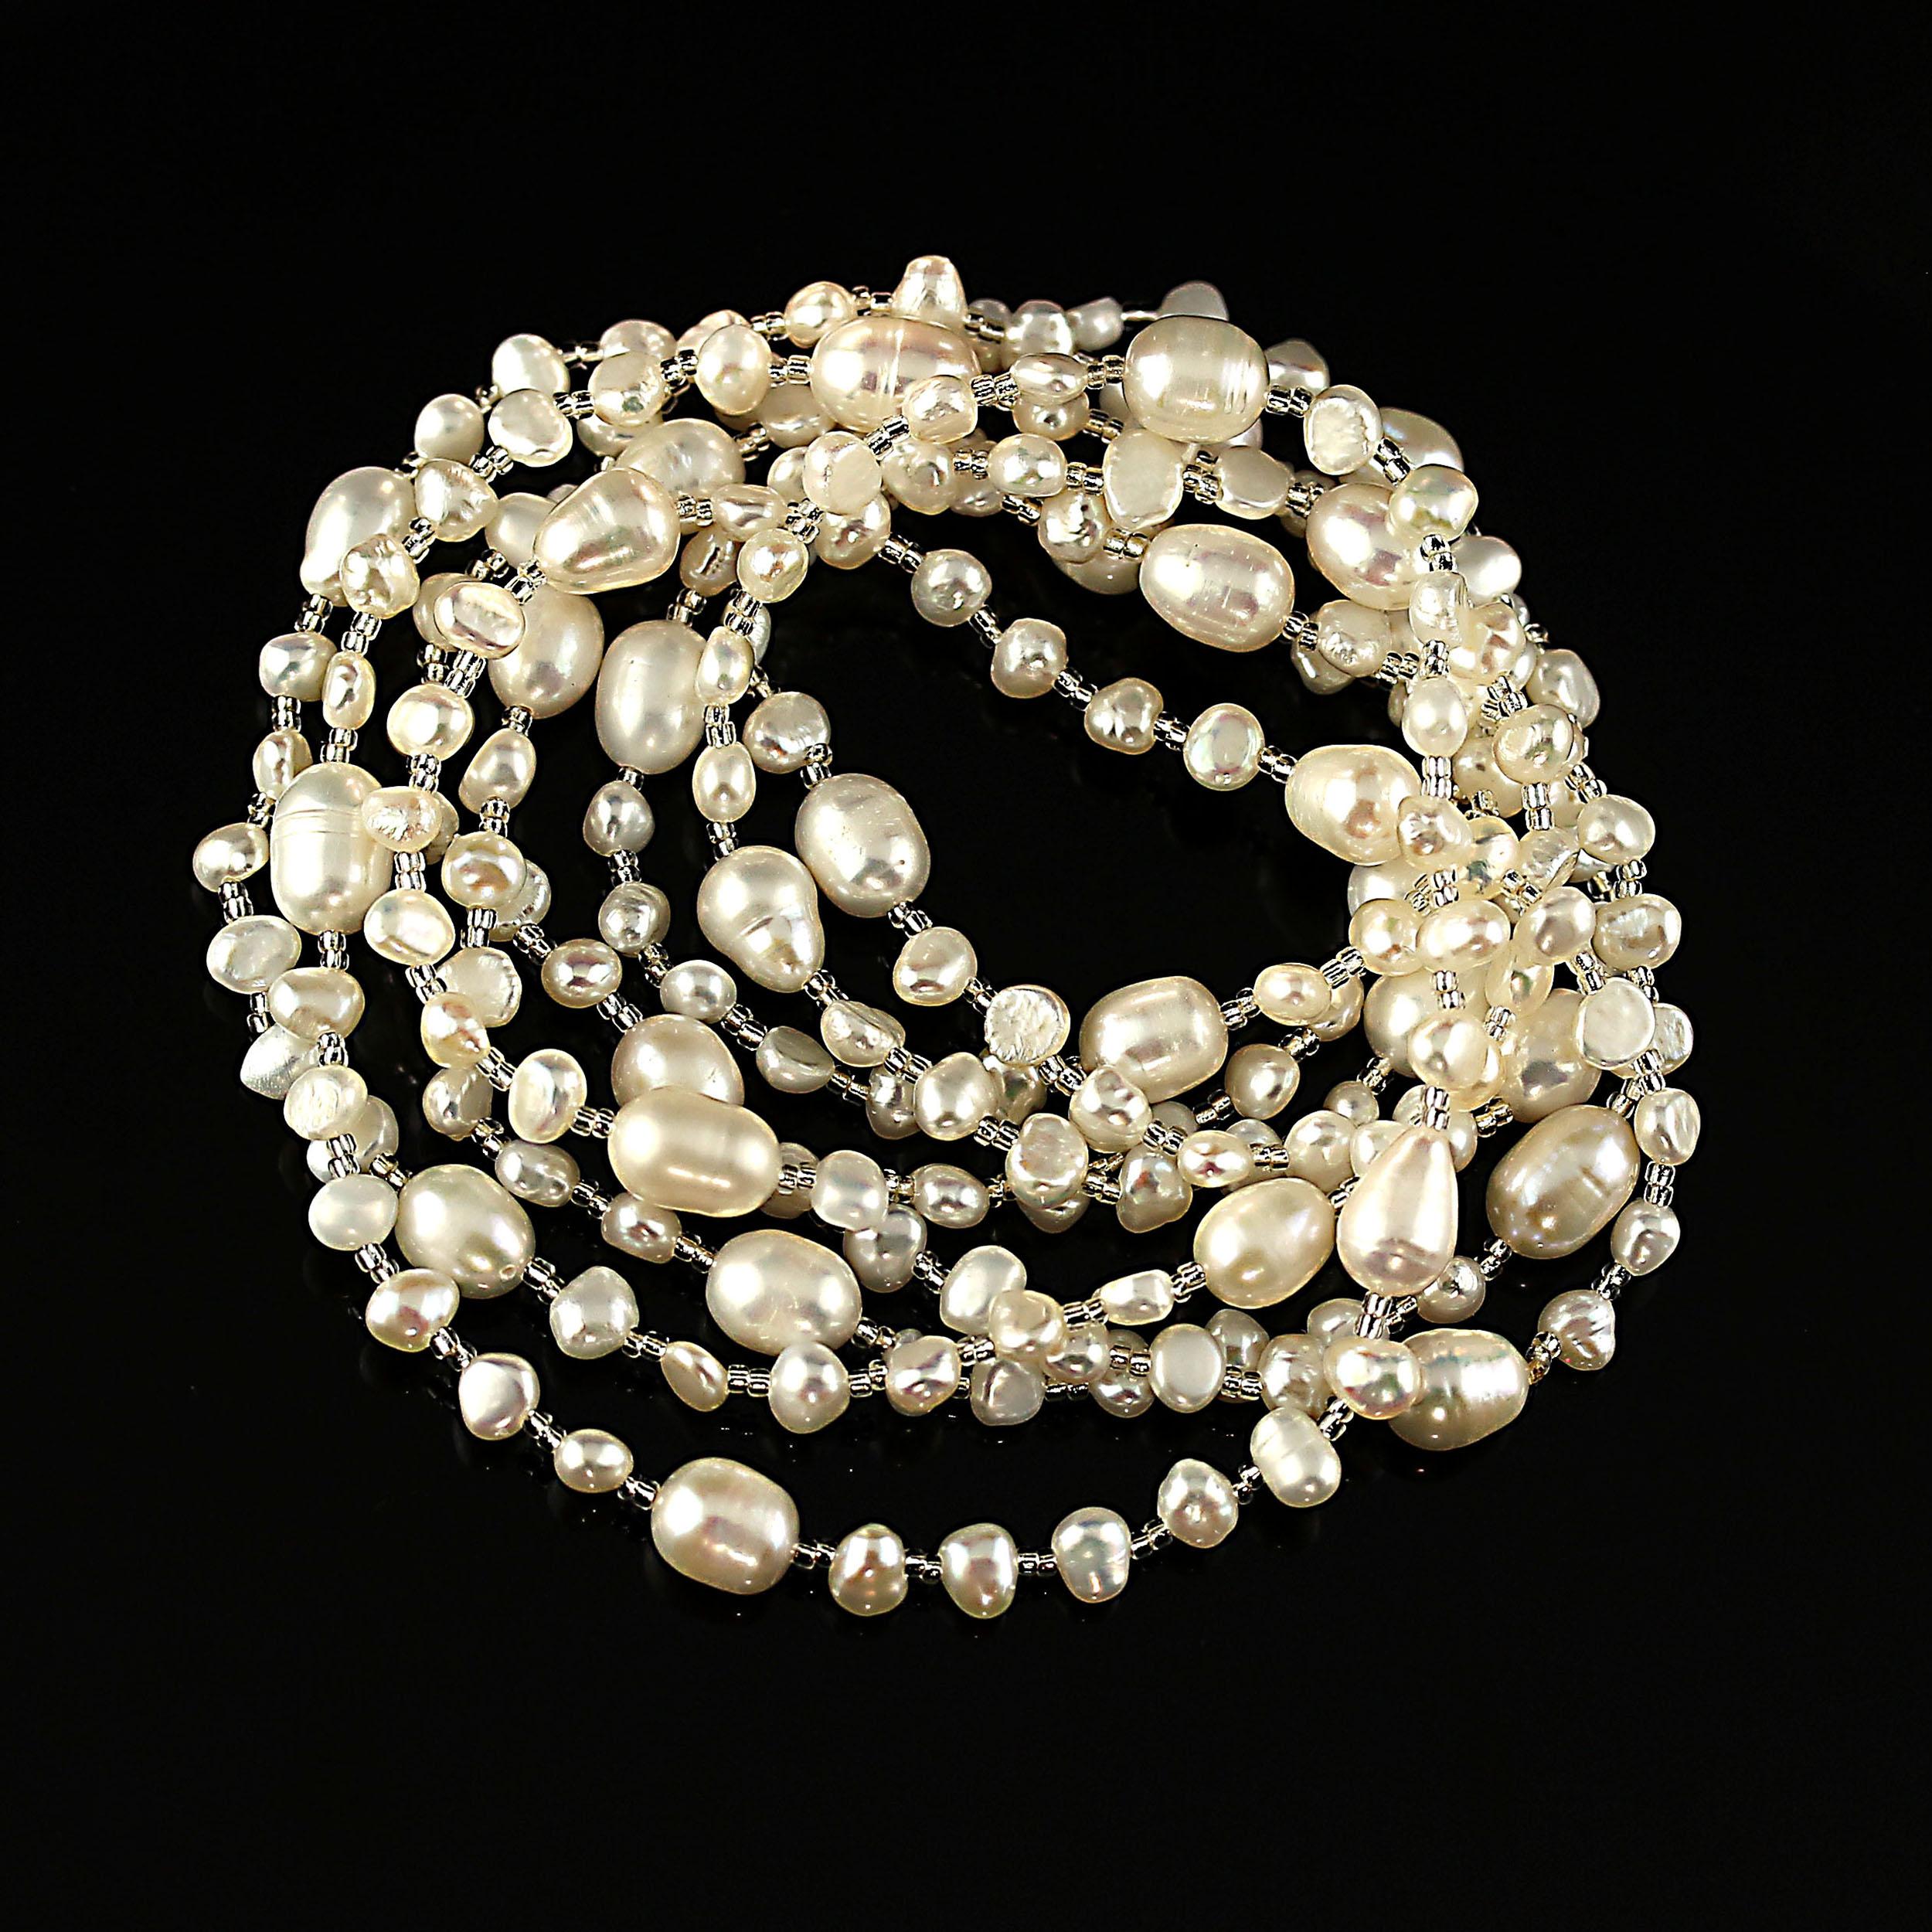 Artisan Continuous Strand Freshwater Pearl Necklace